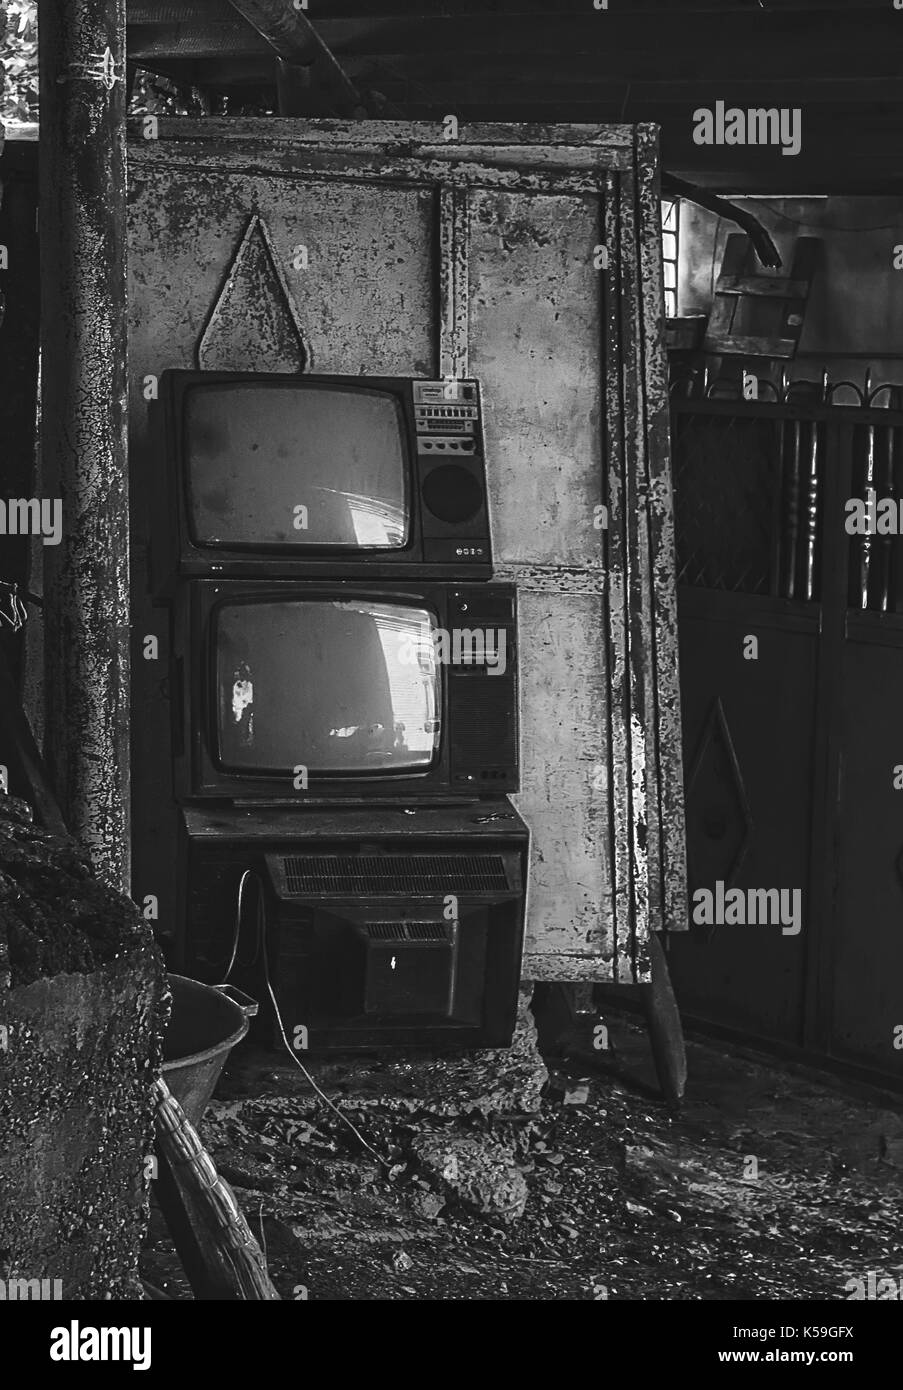 Vintage old television TV sets broken and ruined inside abandoned house Stock Photo